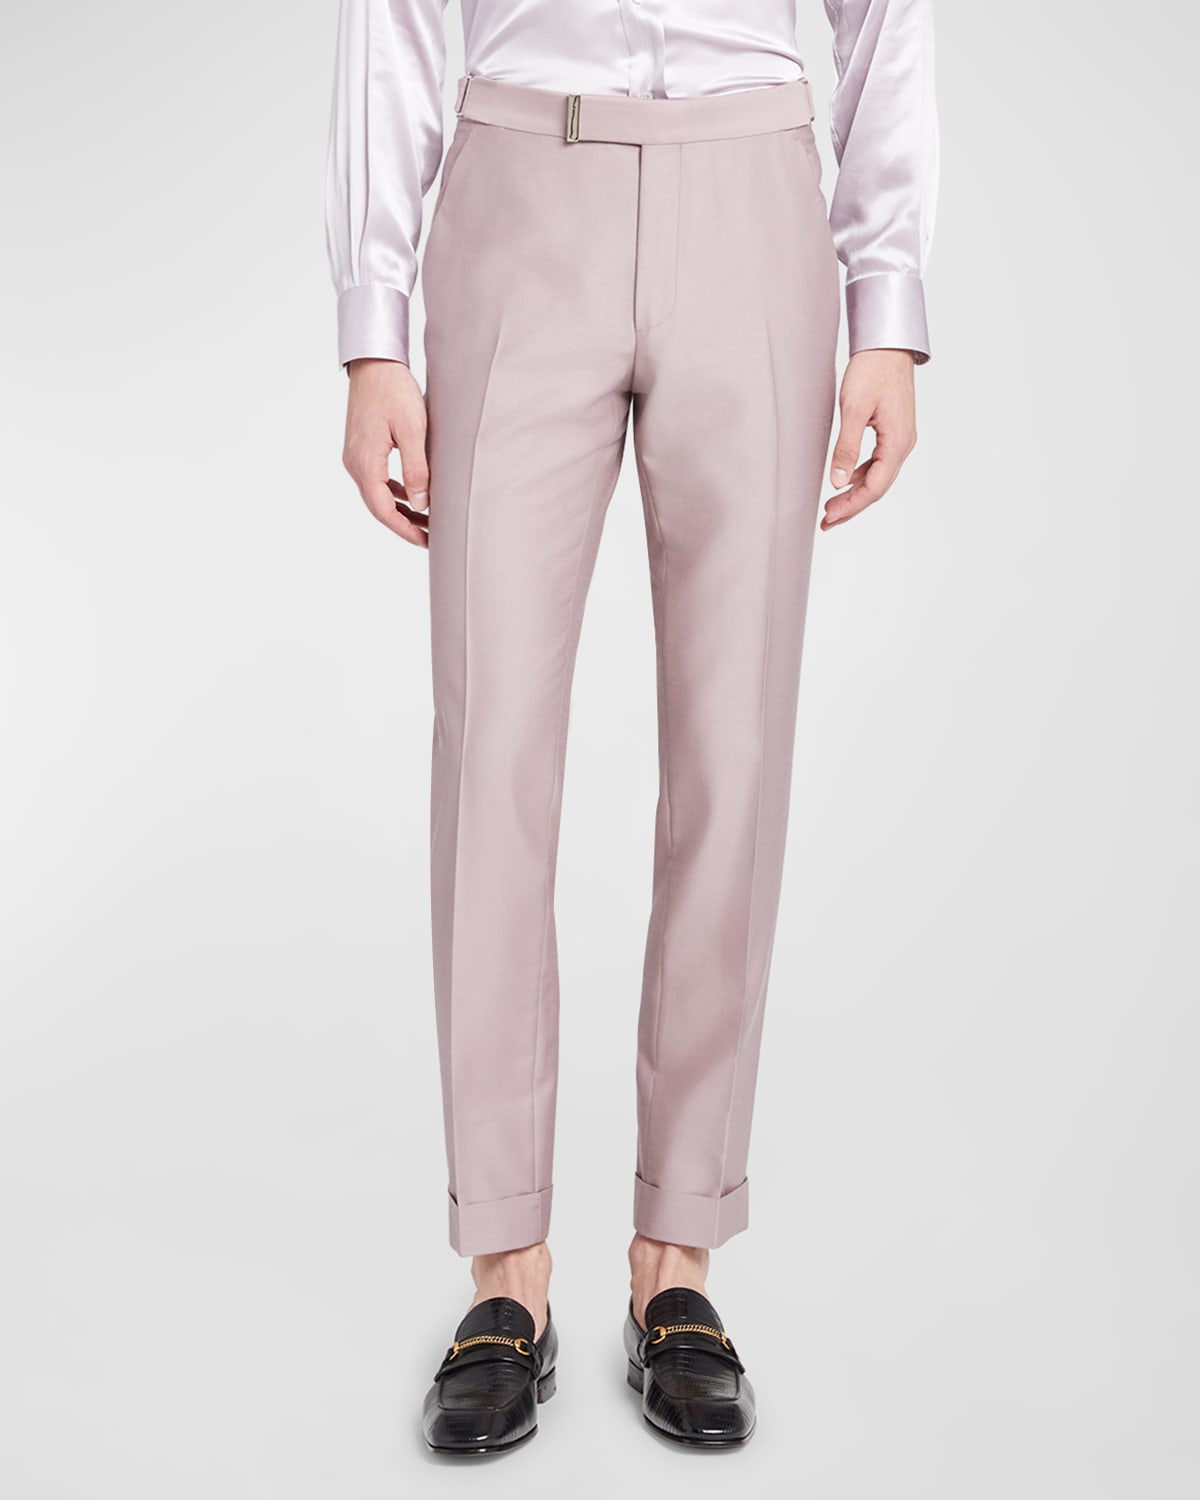 Tom Ford Men's Yarn-dyed Mikado Atticus Trousers In Dusty Rose